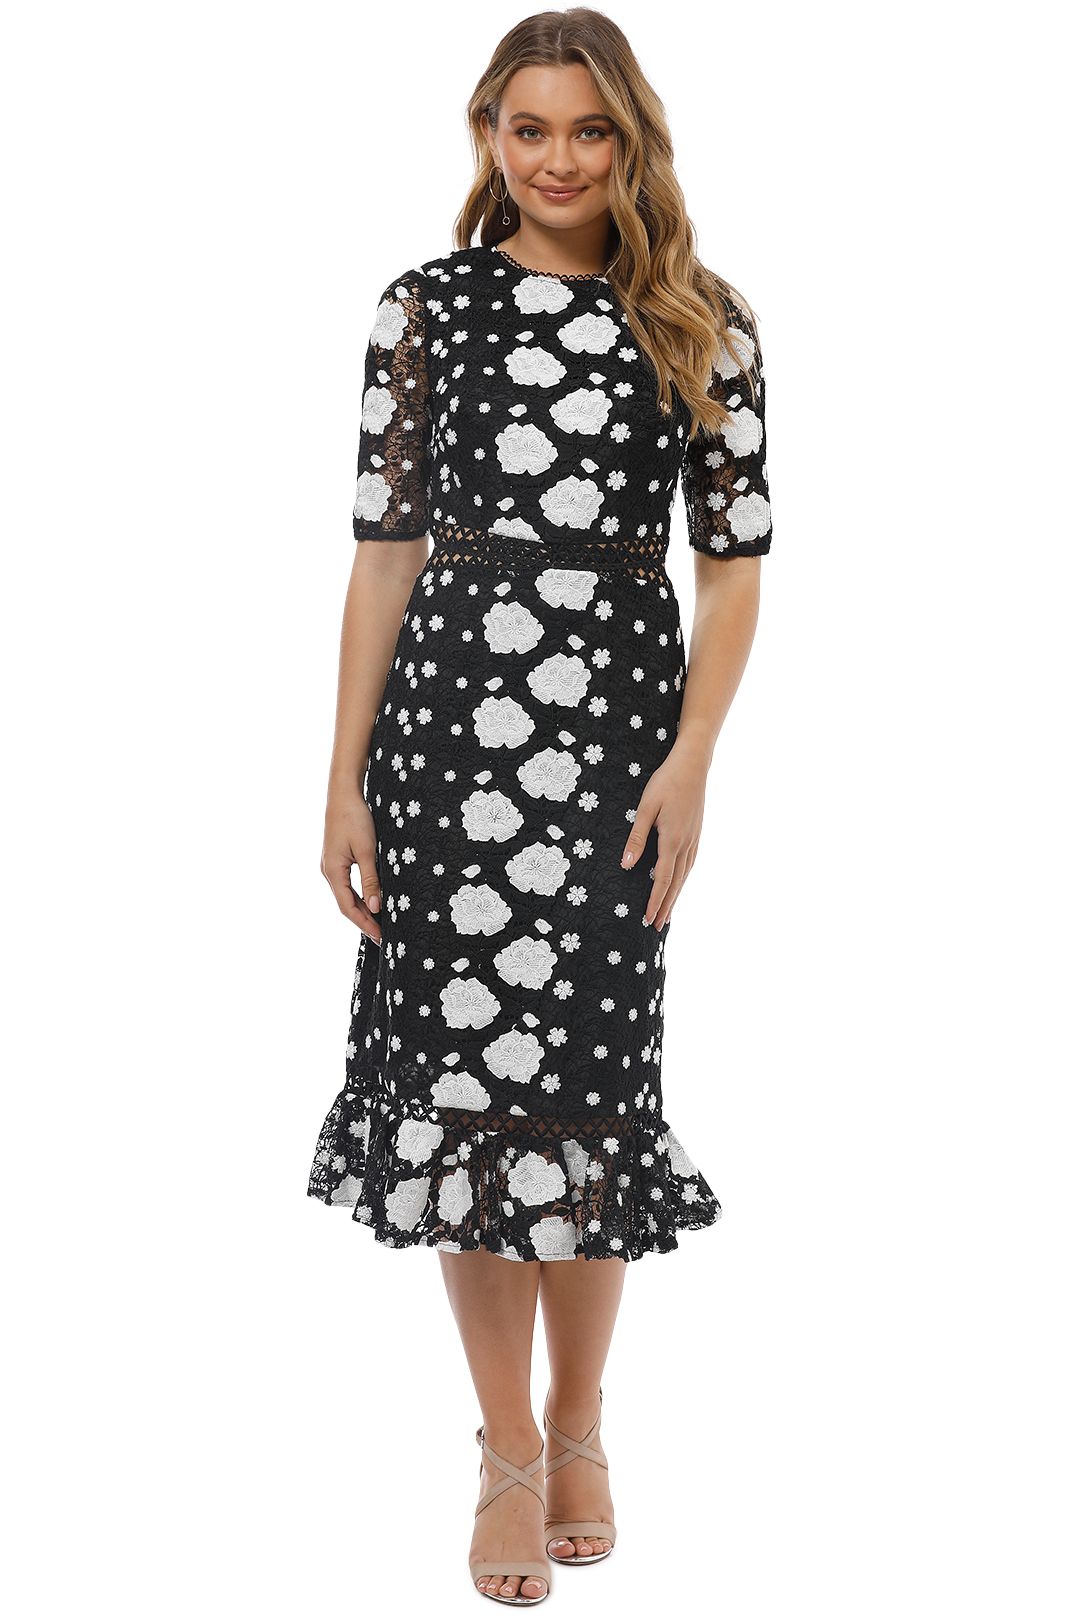 Ministry of Style - Wildflower Midi Dress - Front 